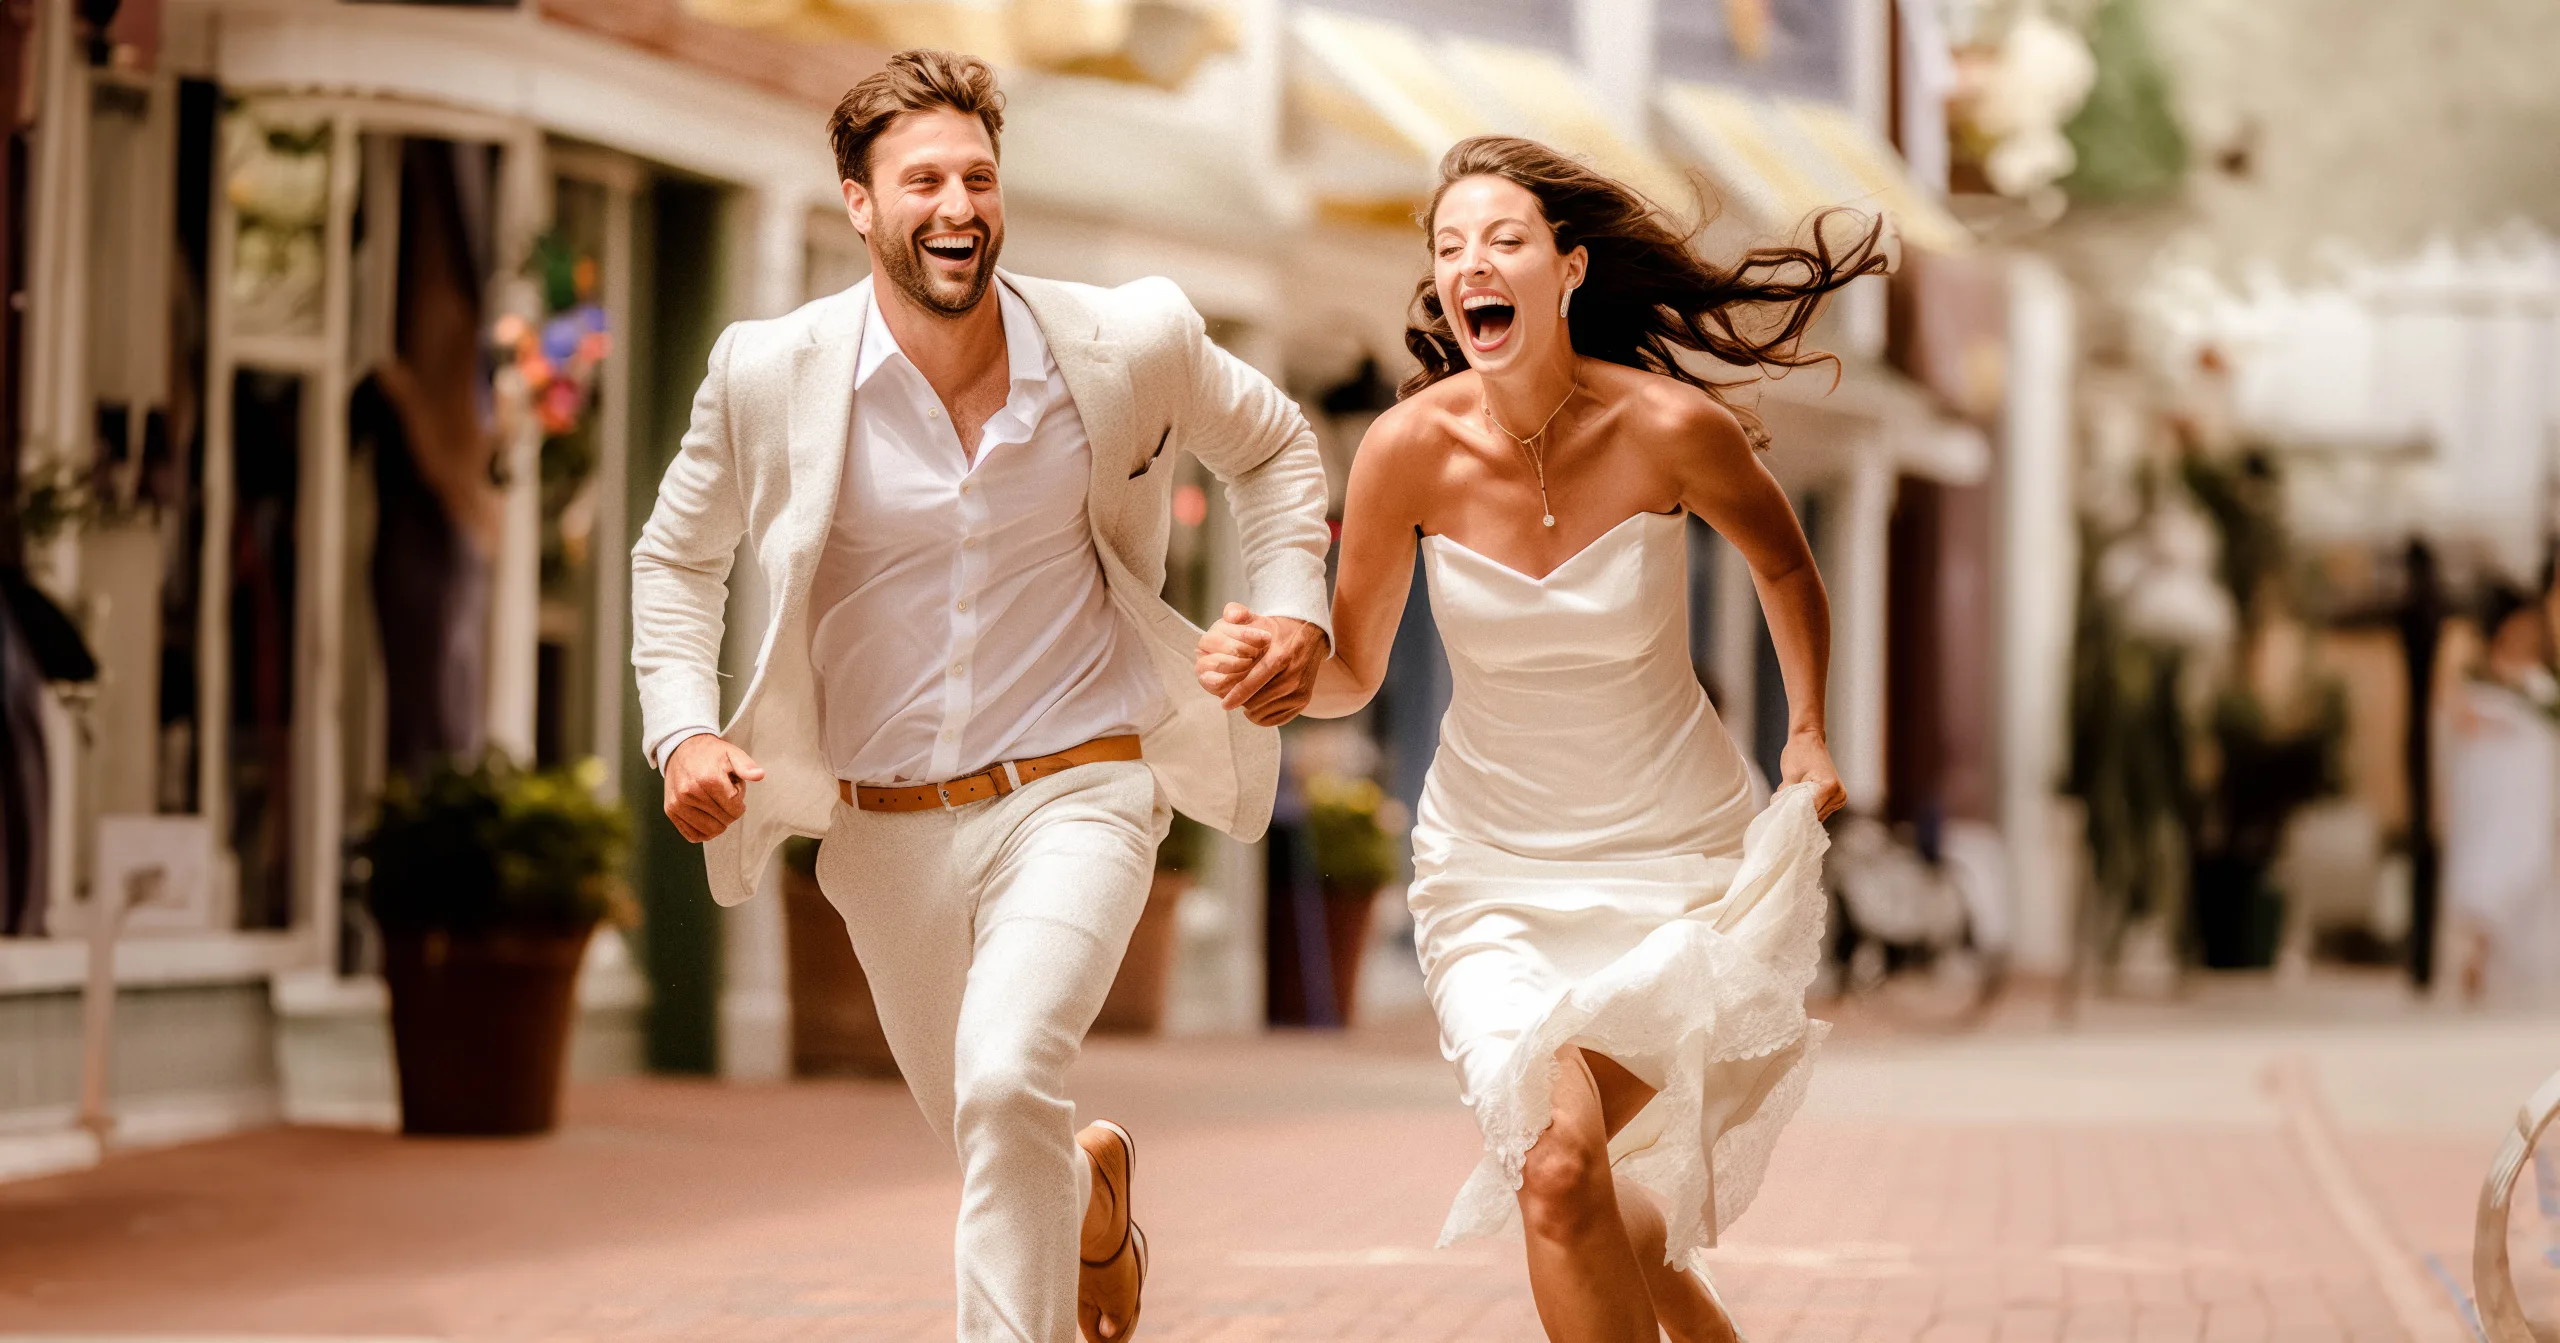 A bride and groom running down a street. the way to document you wedding day